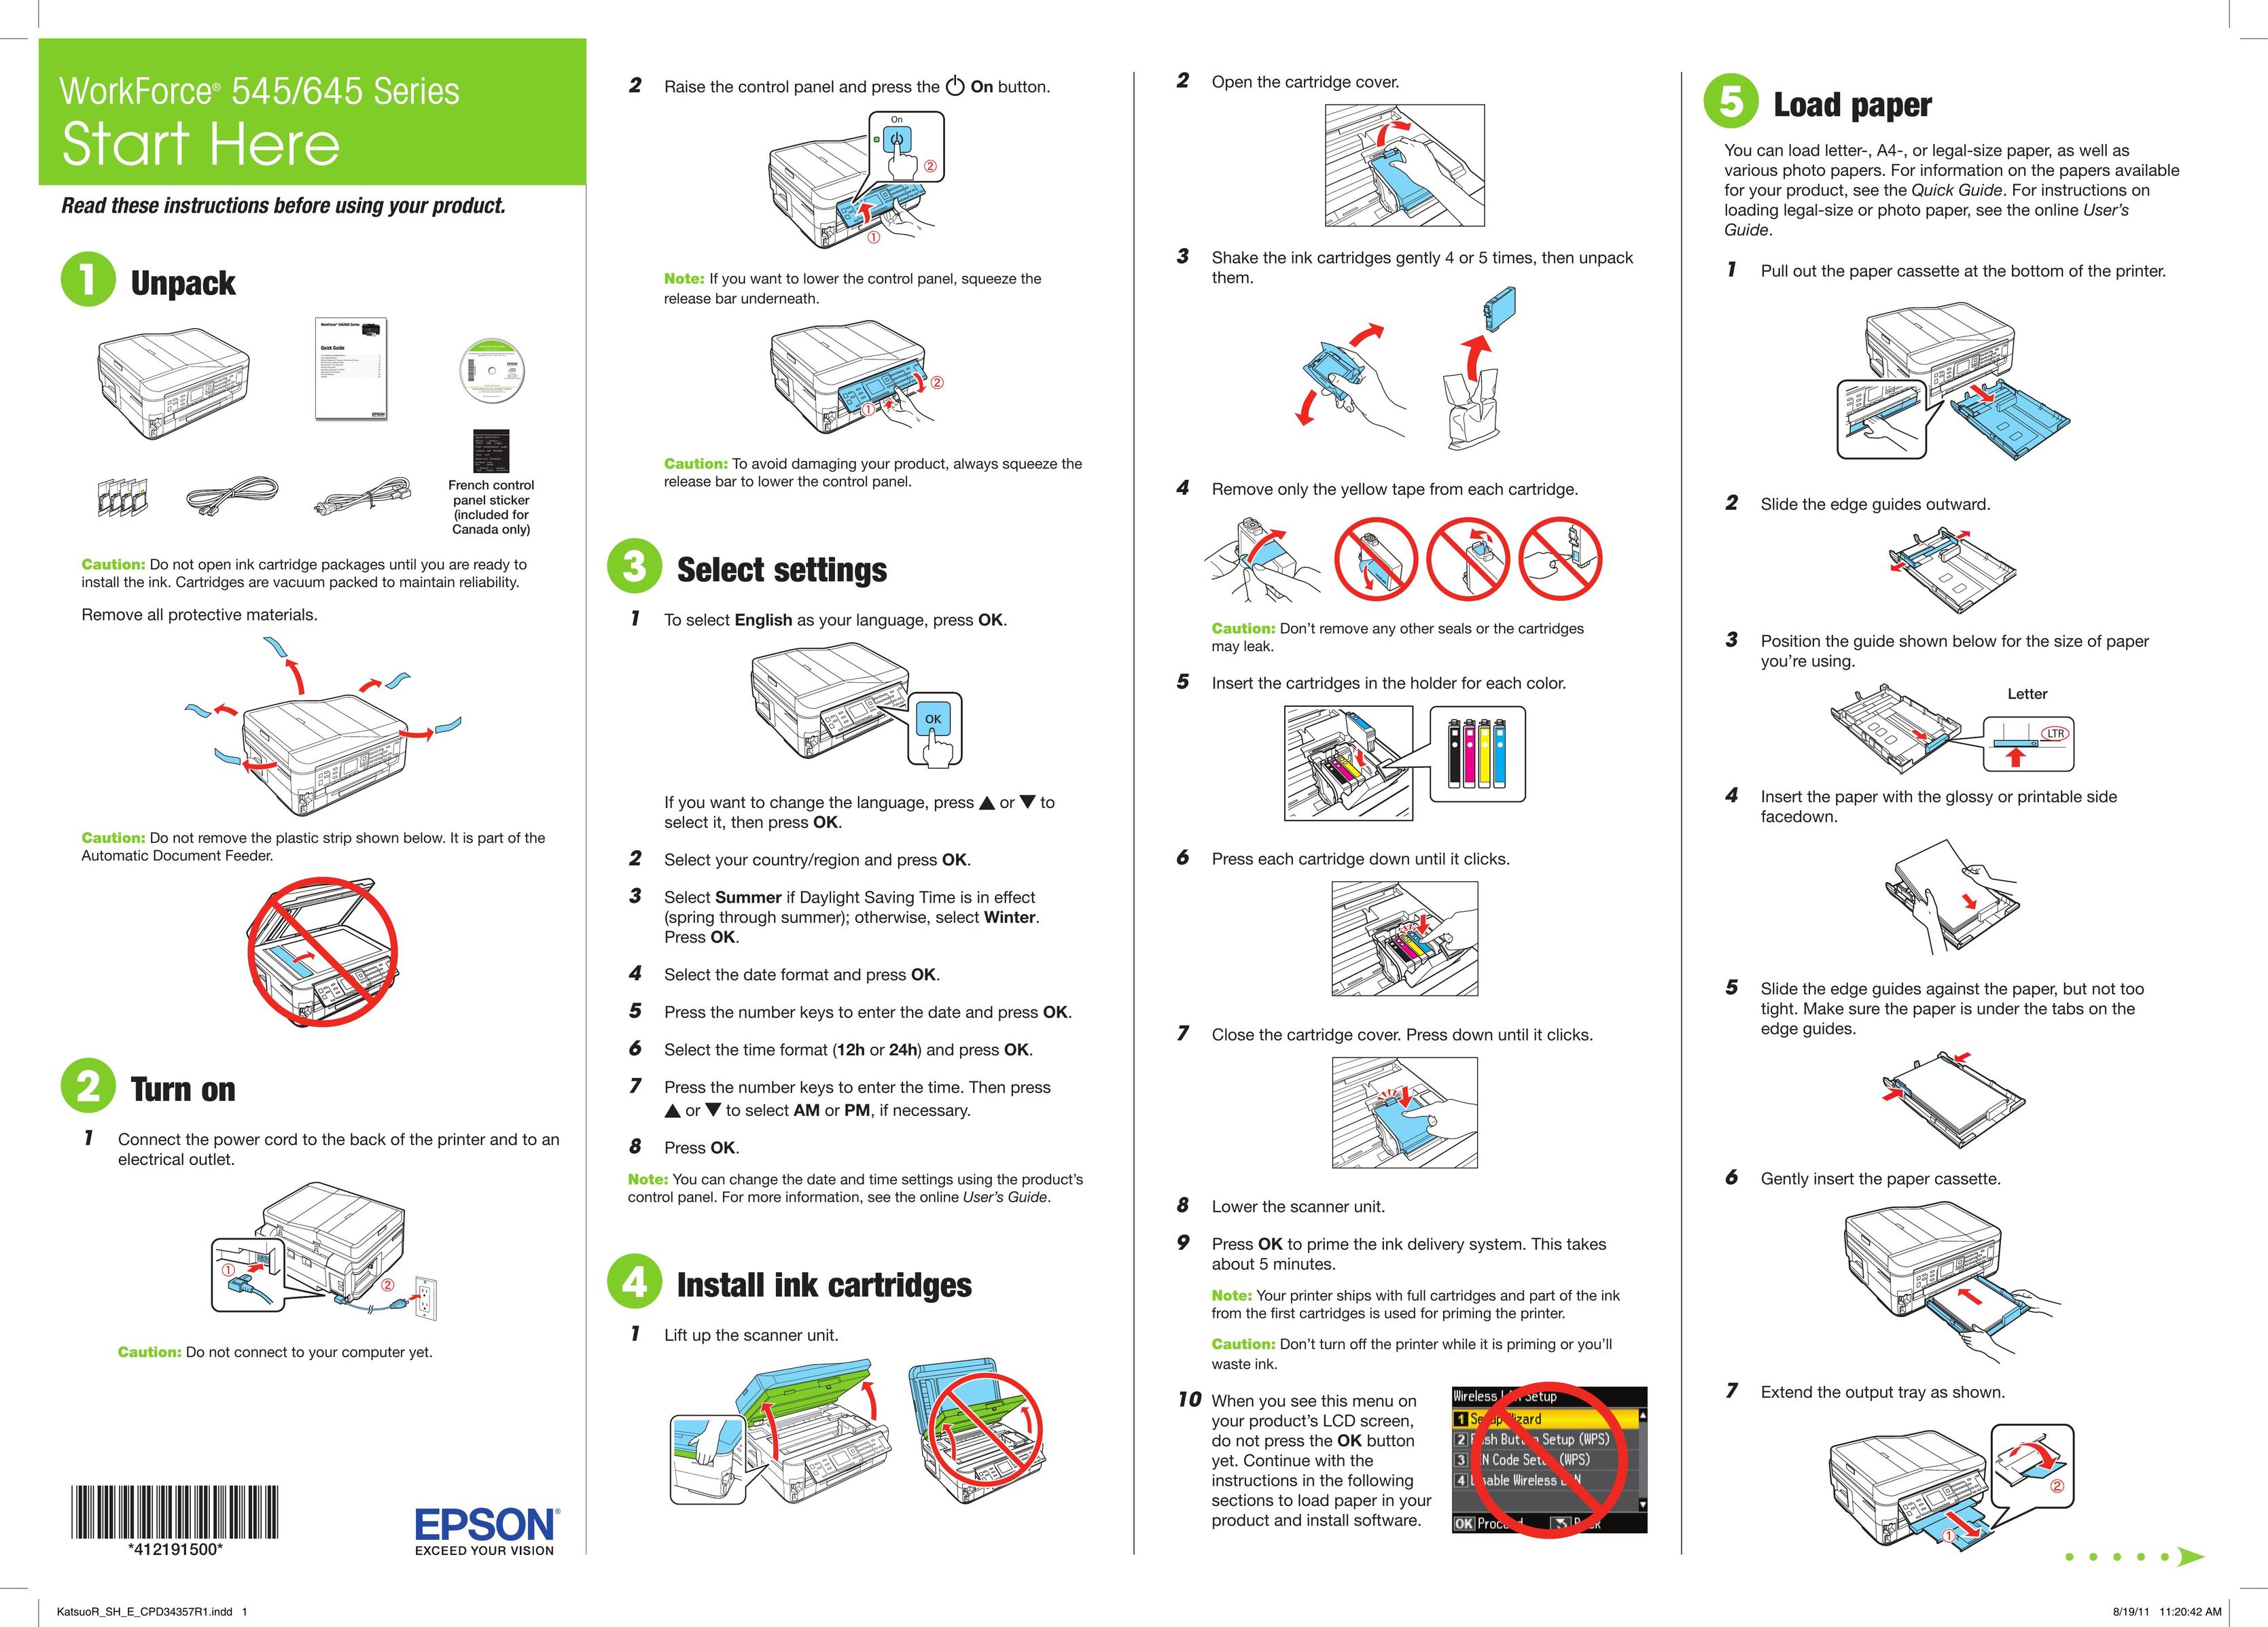 Epson 545 All in One Printer User Manual